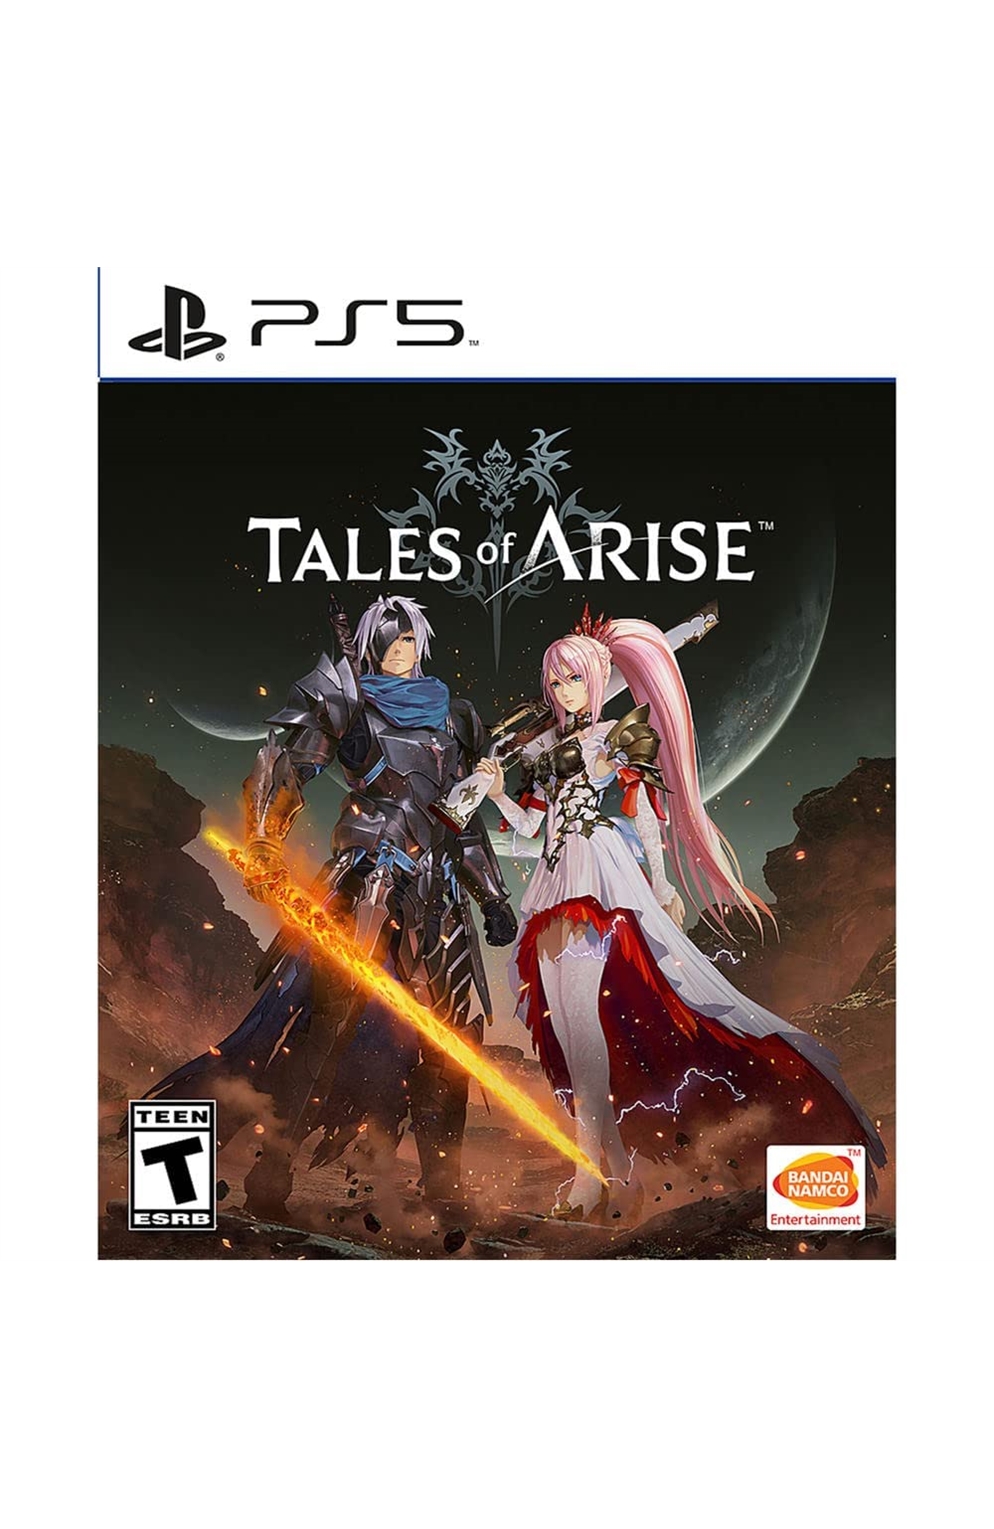 Playstation 5 Ps5 Tales of Arise